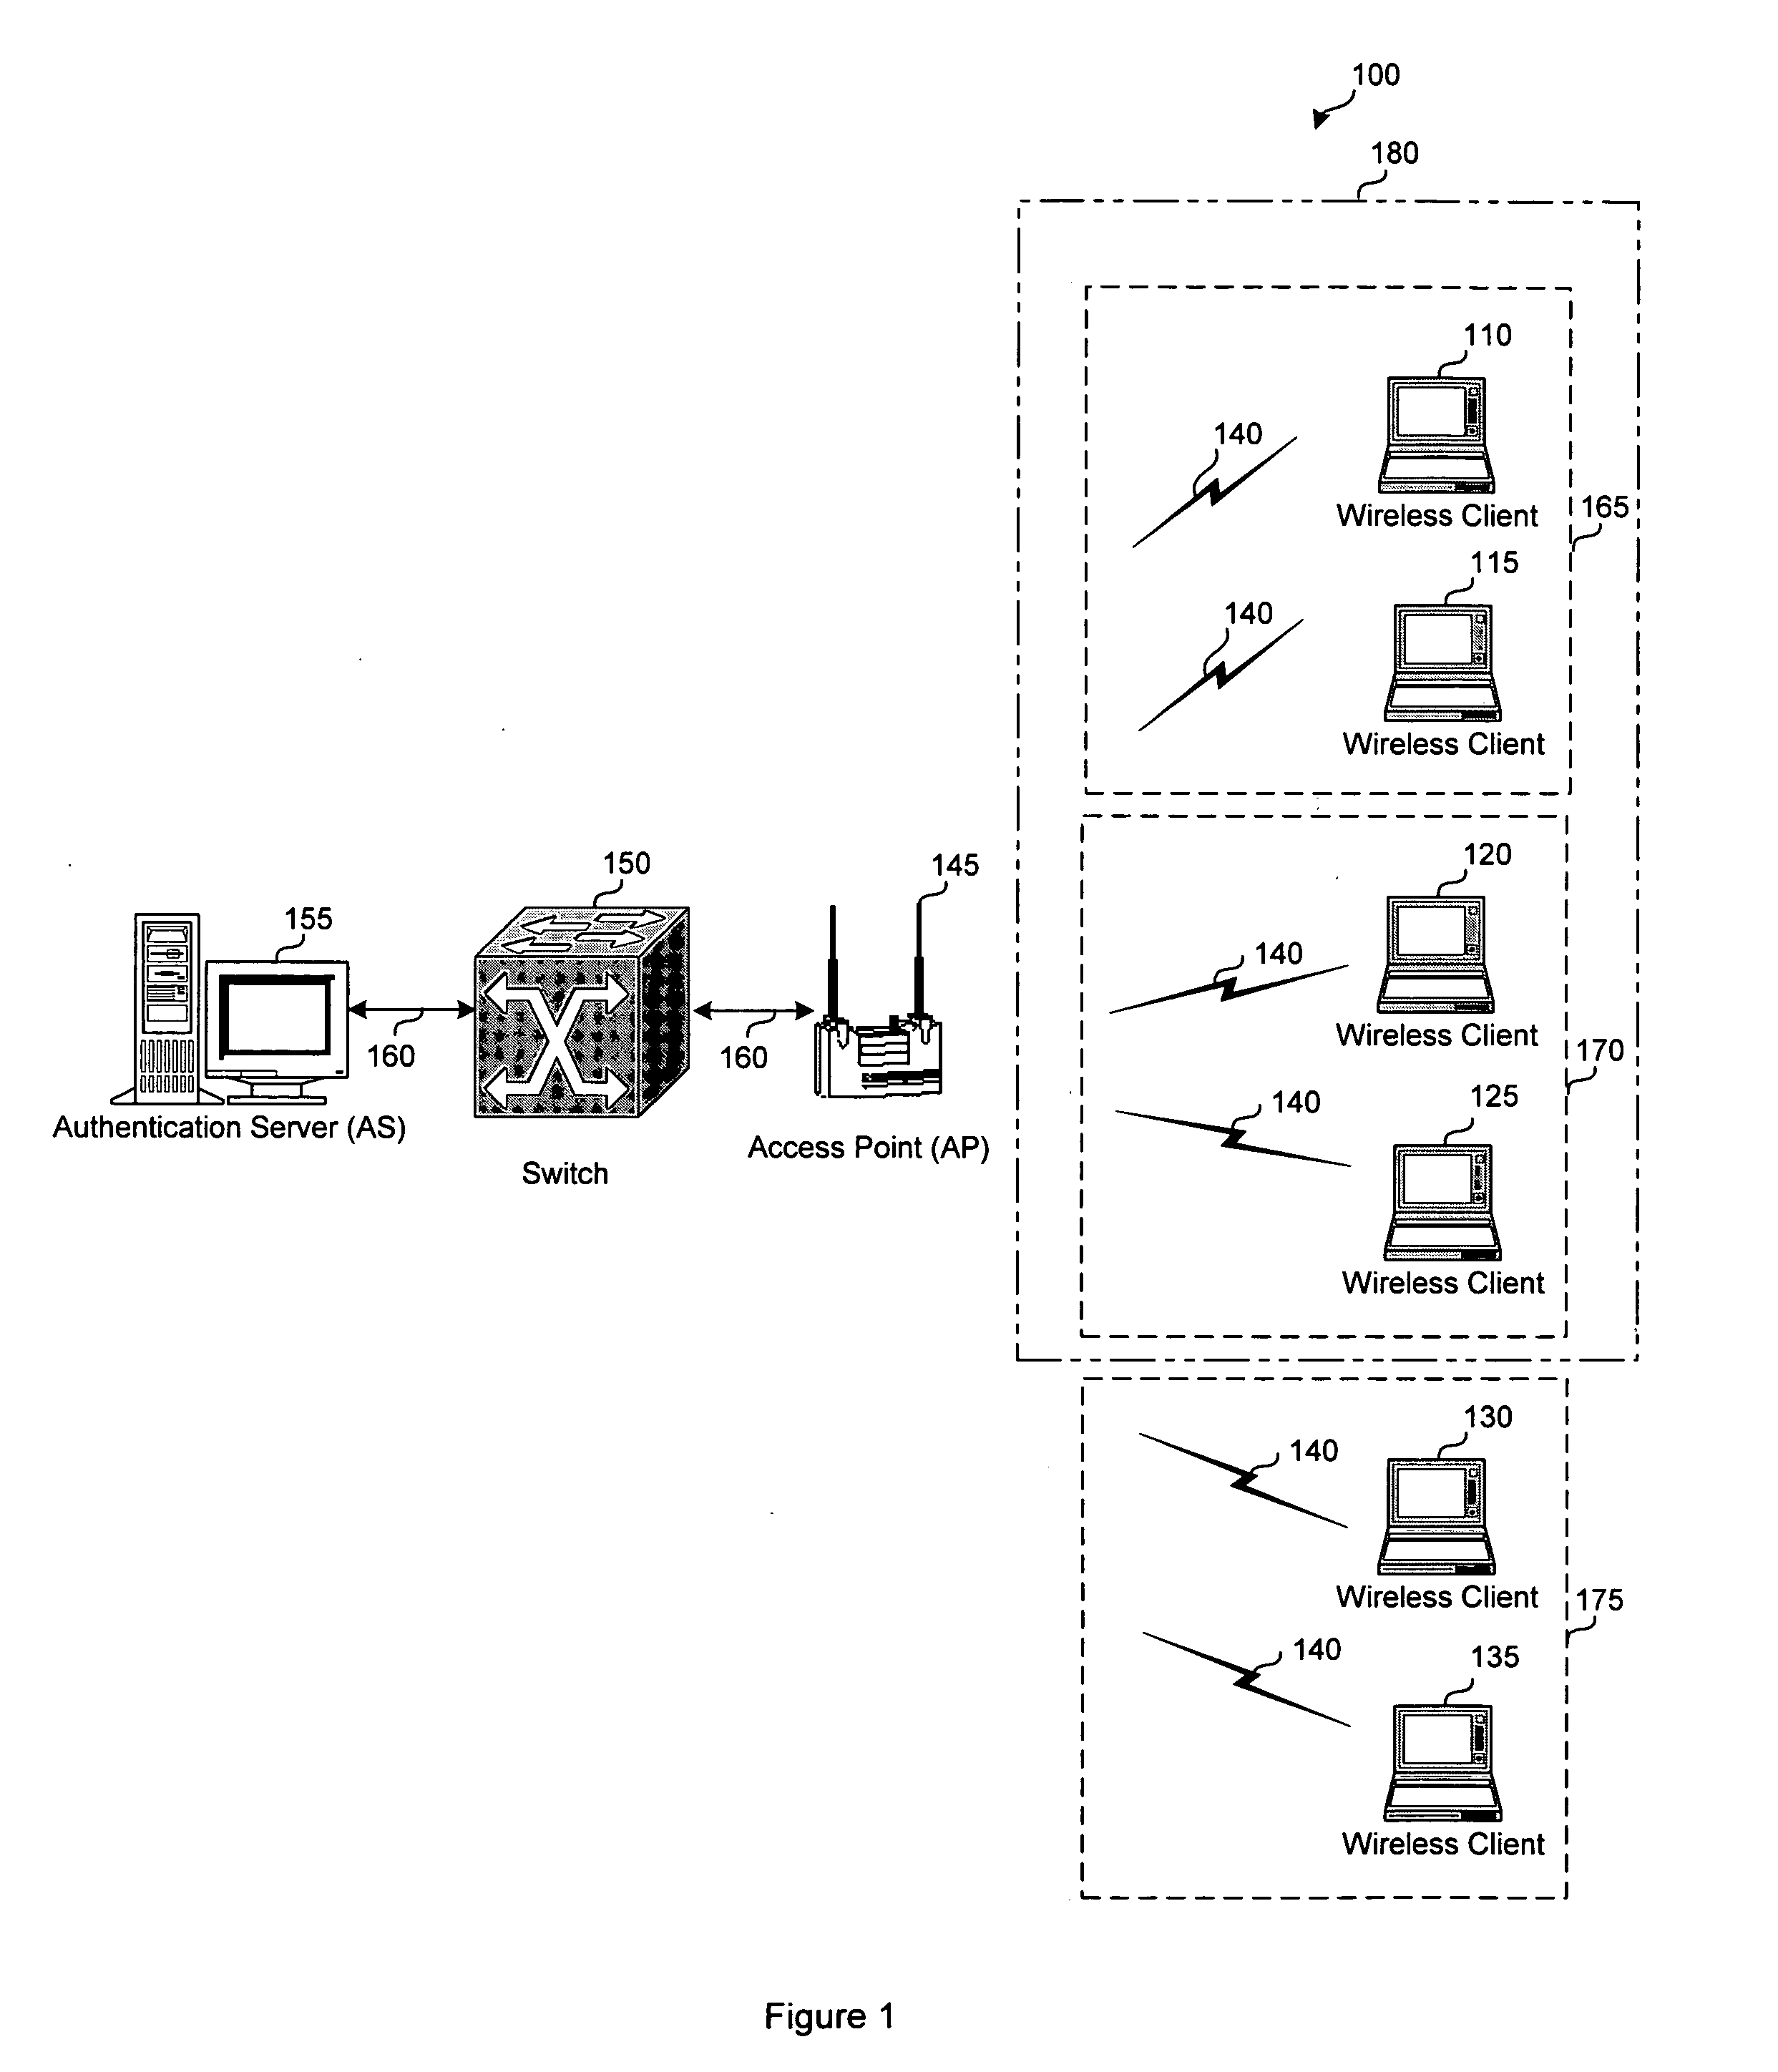 System and method for grouping multiple VLANs into a single 802.11 IP multicast domain